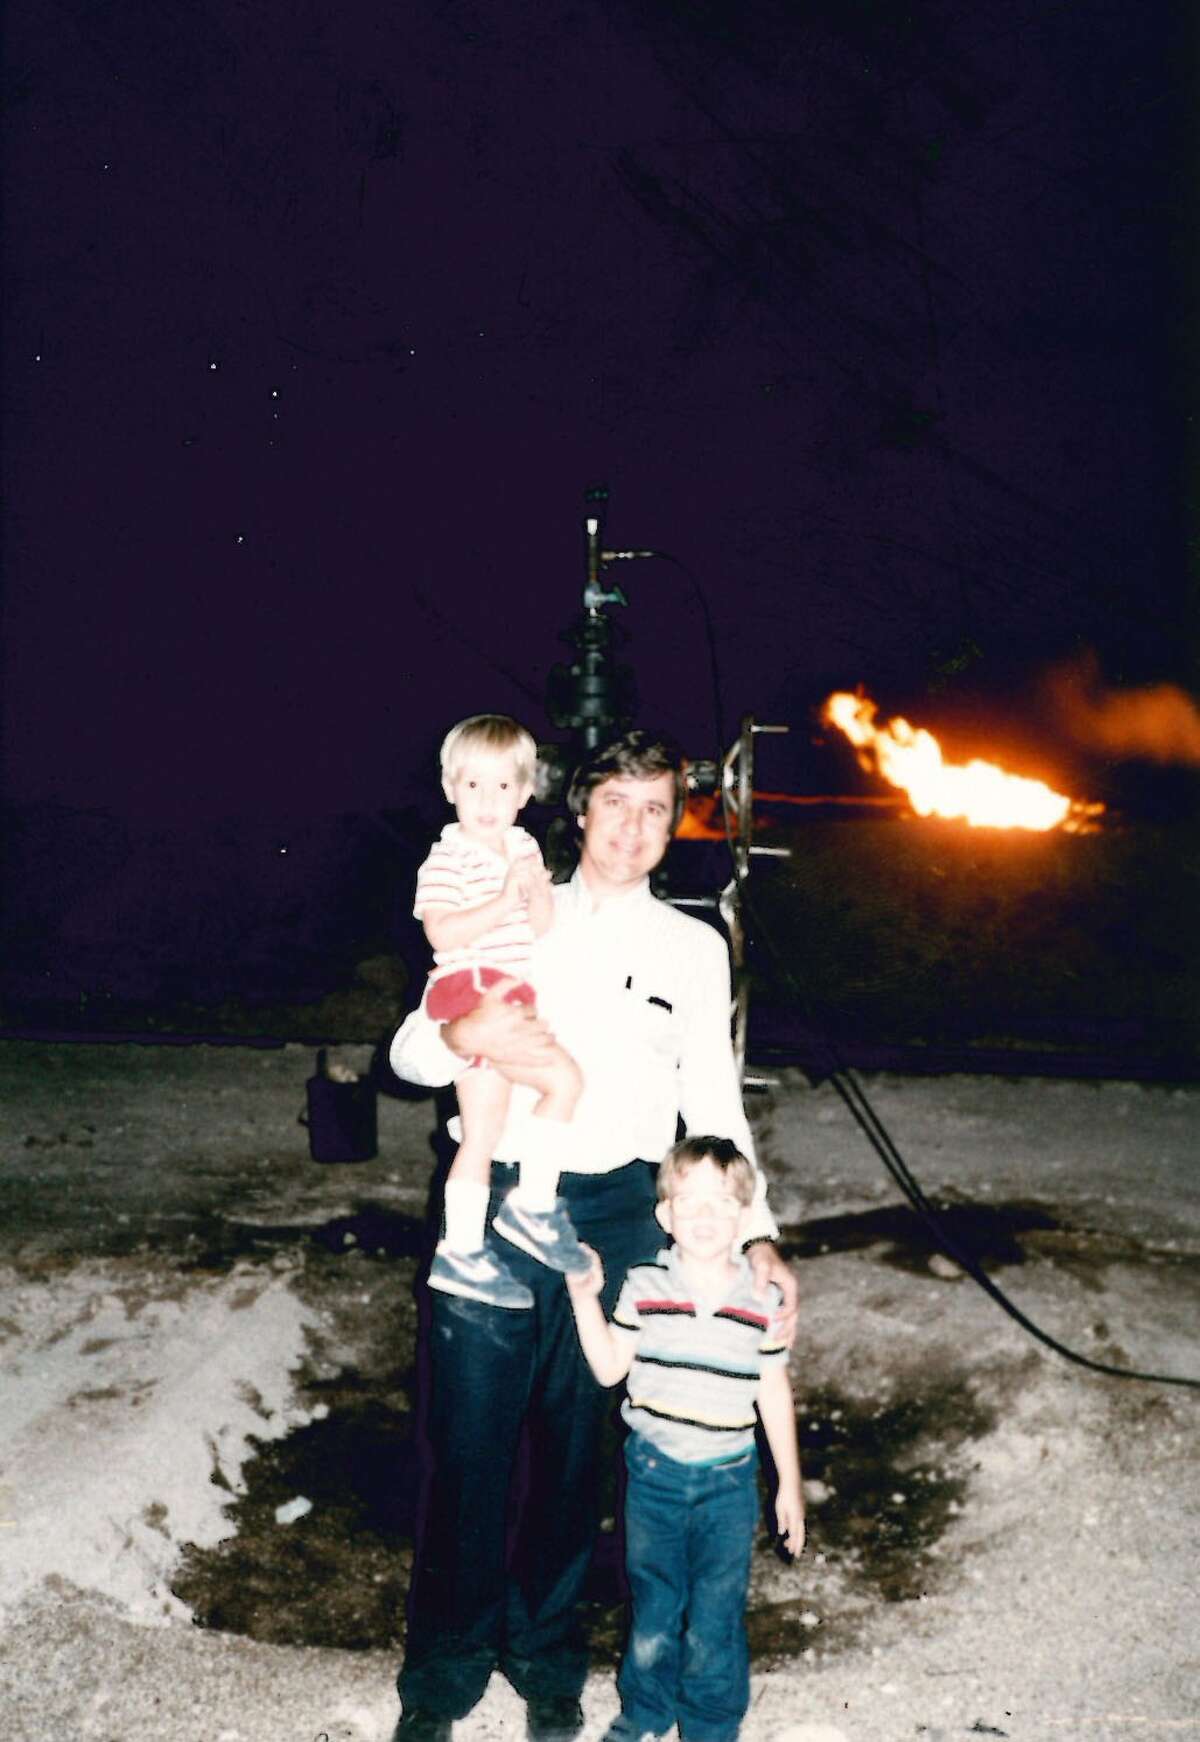 As a gas flare lights the scene, Larry Oldham stands with sons Cody, left, and Christoper, at a well site near Big Spring, Texas in 1986--around the time the bottom fell out of the Texas oil industry. Oldham founded Midland-based independent oil company Parallel Petroleum in 1979. (Photo courtesy Larry Oldham)